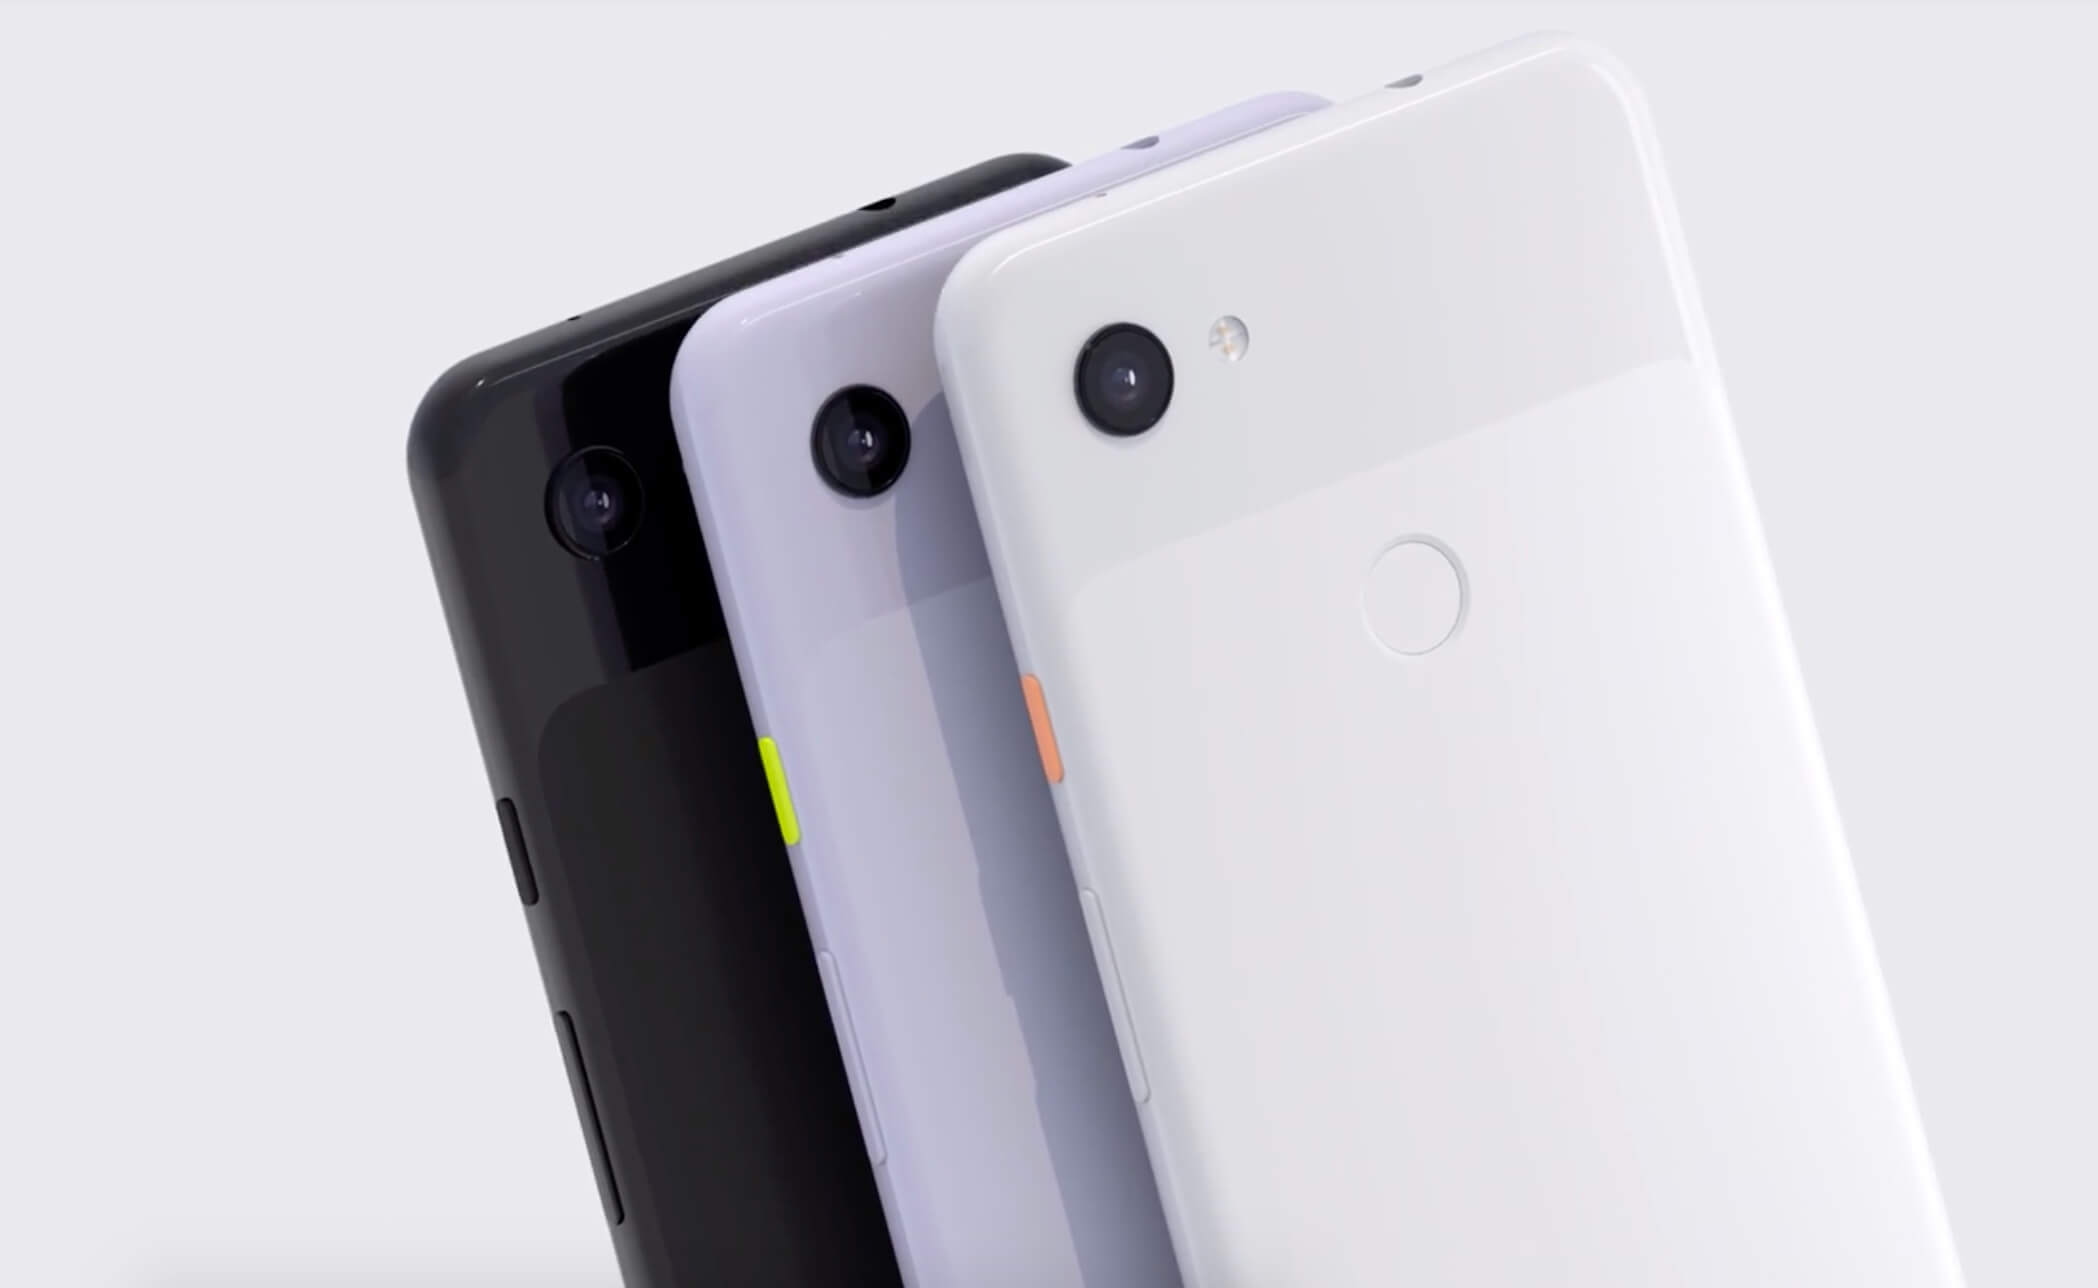 2019 was Google's best year for phone sales, beating OnePlus